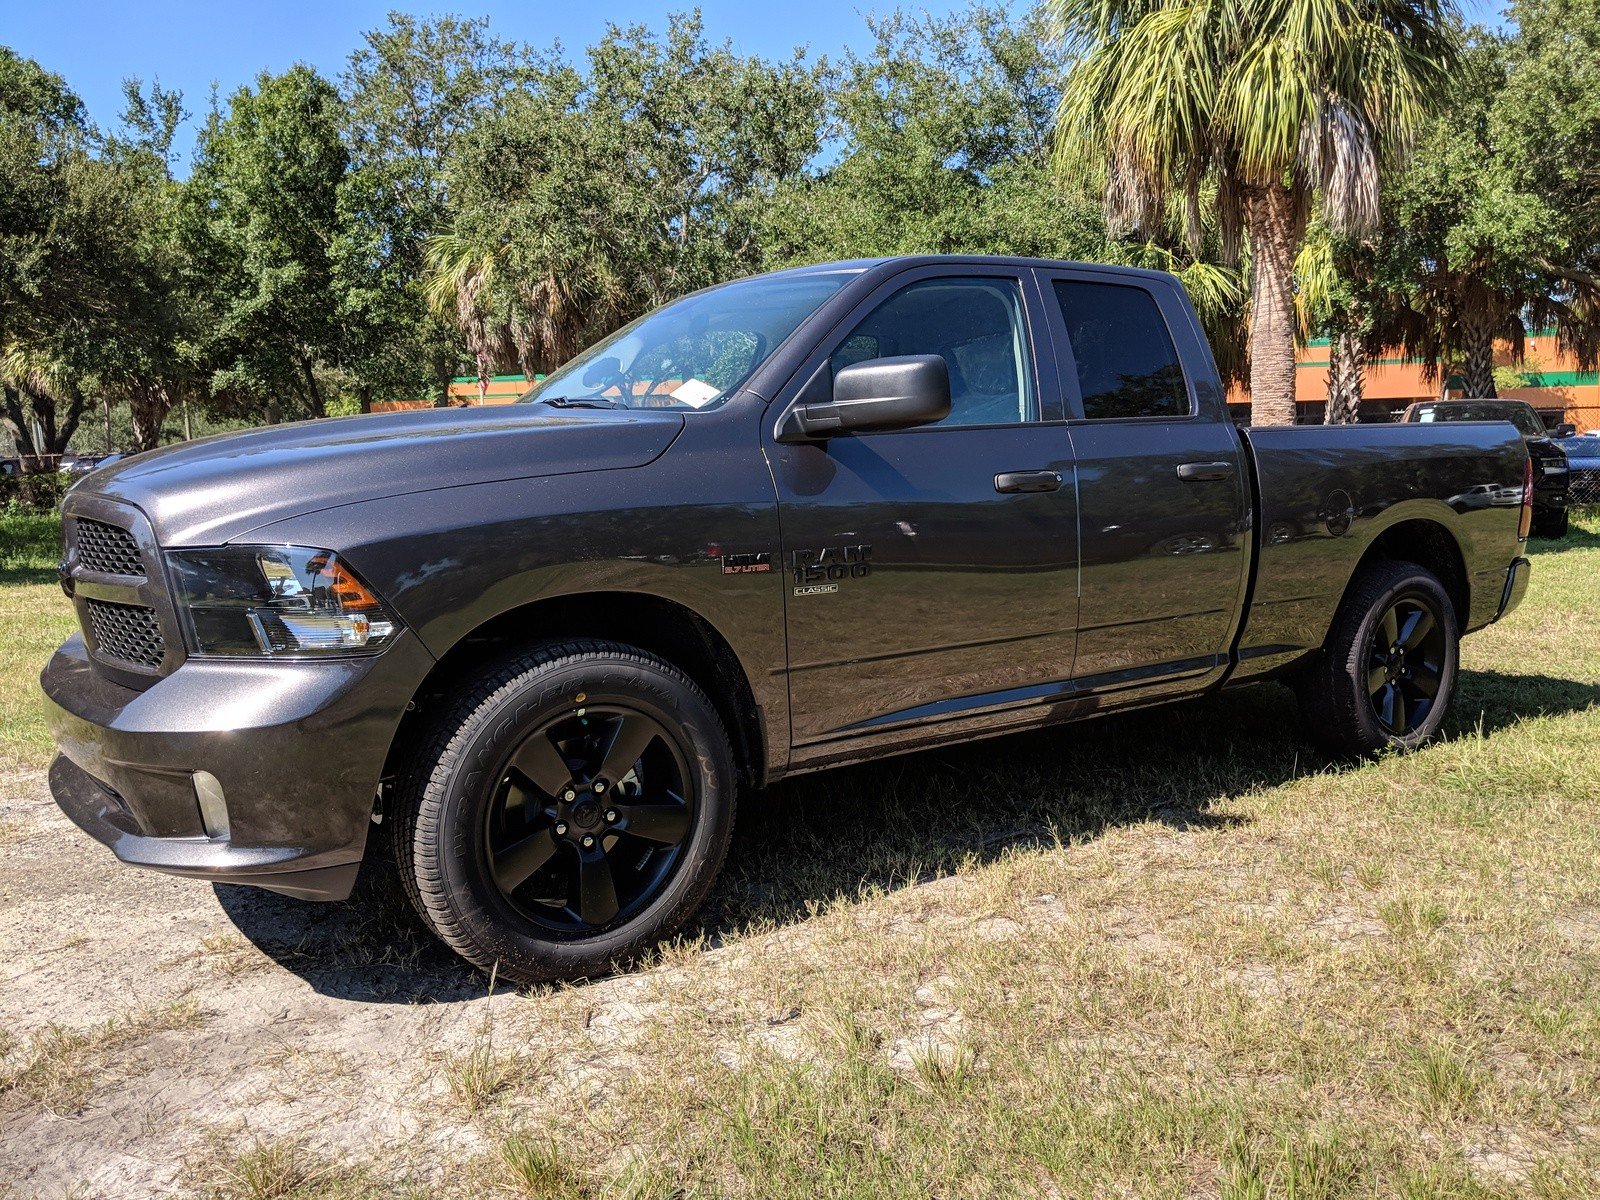 New 2019 RAM 1500 Classic Express Quad Cab in Tampa #S503199 | Jerry Ulm Chrysler, Dodge, Jeep, Ram What Size Tires Are On A 2019 Ram 1500 Classic